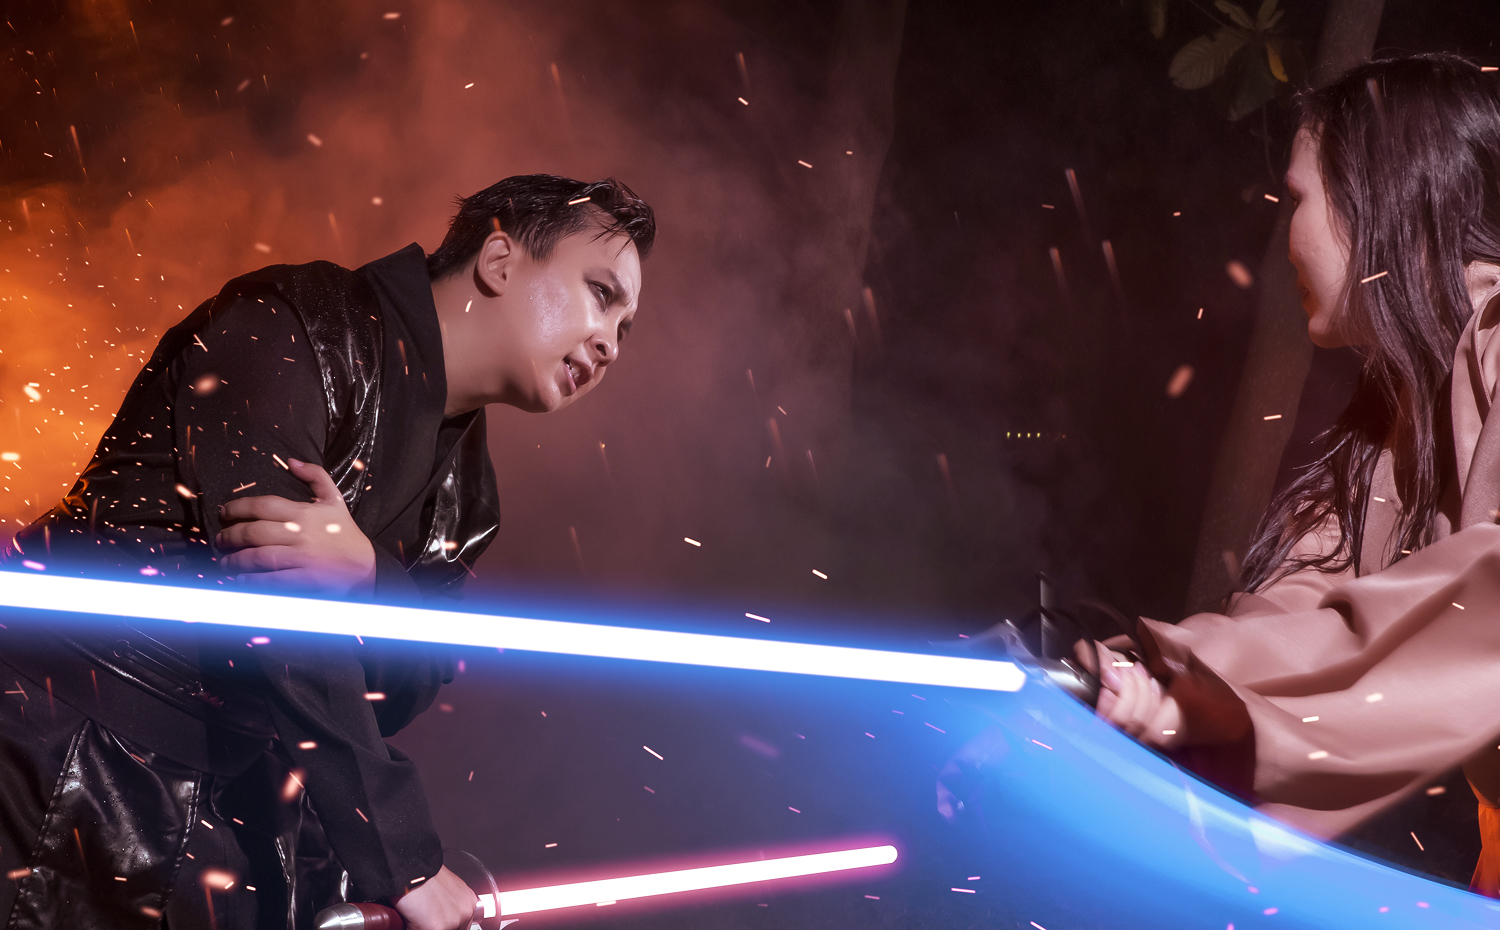 Singaporean couple Adrian Ng and Adeline Wong in their Star Wars-themed photo shoot. Adrian portrays a Jedi knight who goes to the dark side and fights his own wife. CLICK ON IMAGE TO LAUNCH PHOTO GALLERY. Photos: The Art of Mezame